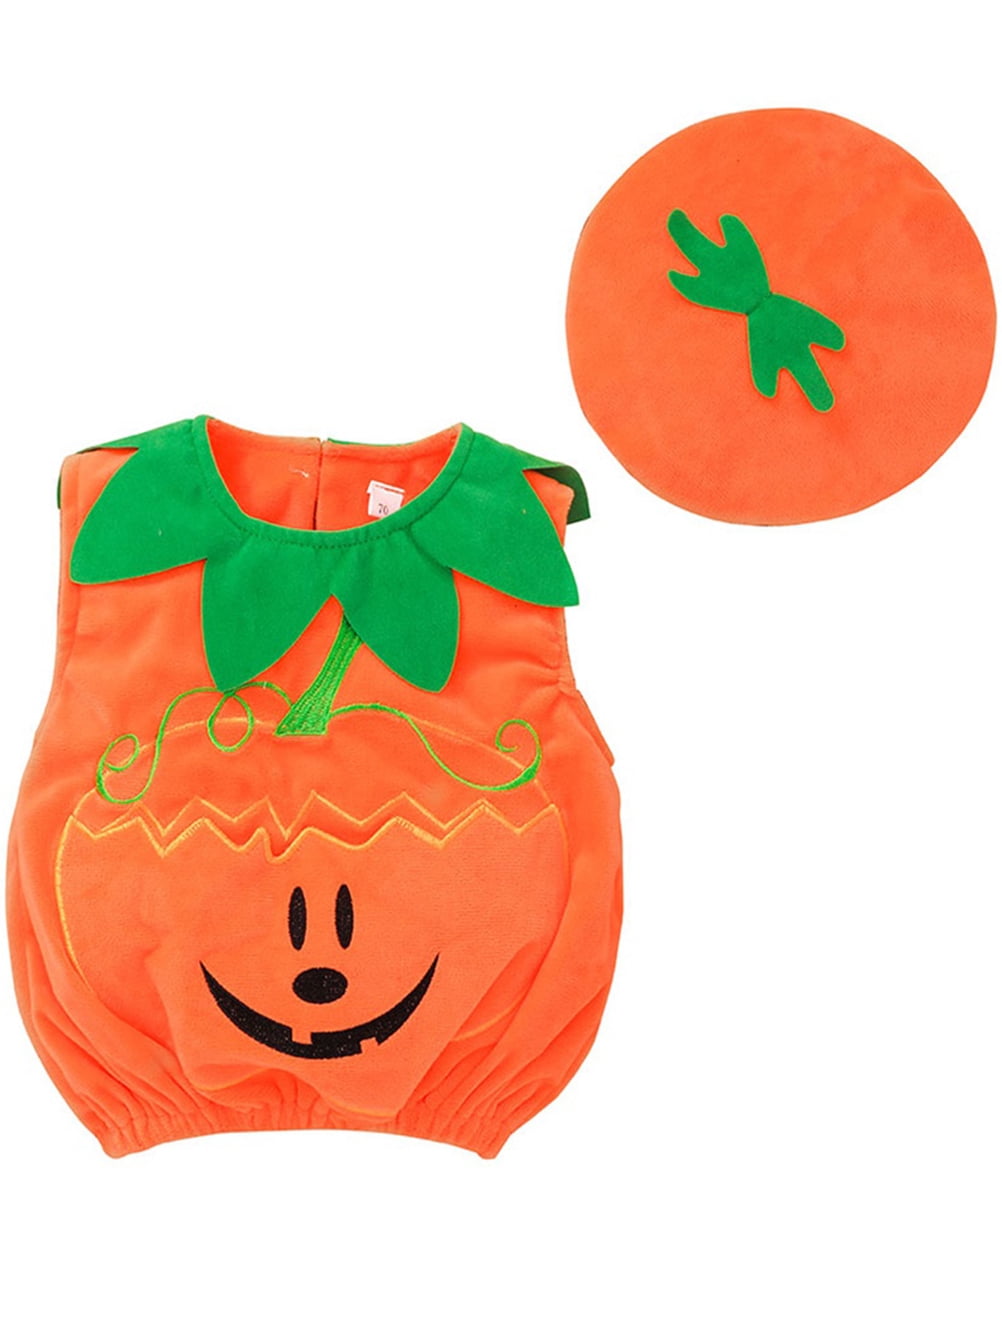 Actoyo Toddler Baby Girl Boy Halloween Pumpkin Hat Costume Outfit Fancy Dress Clothes